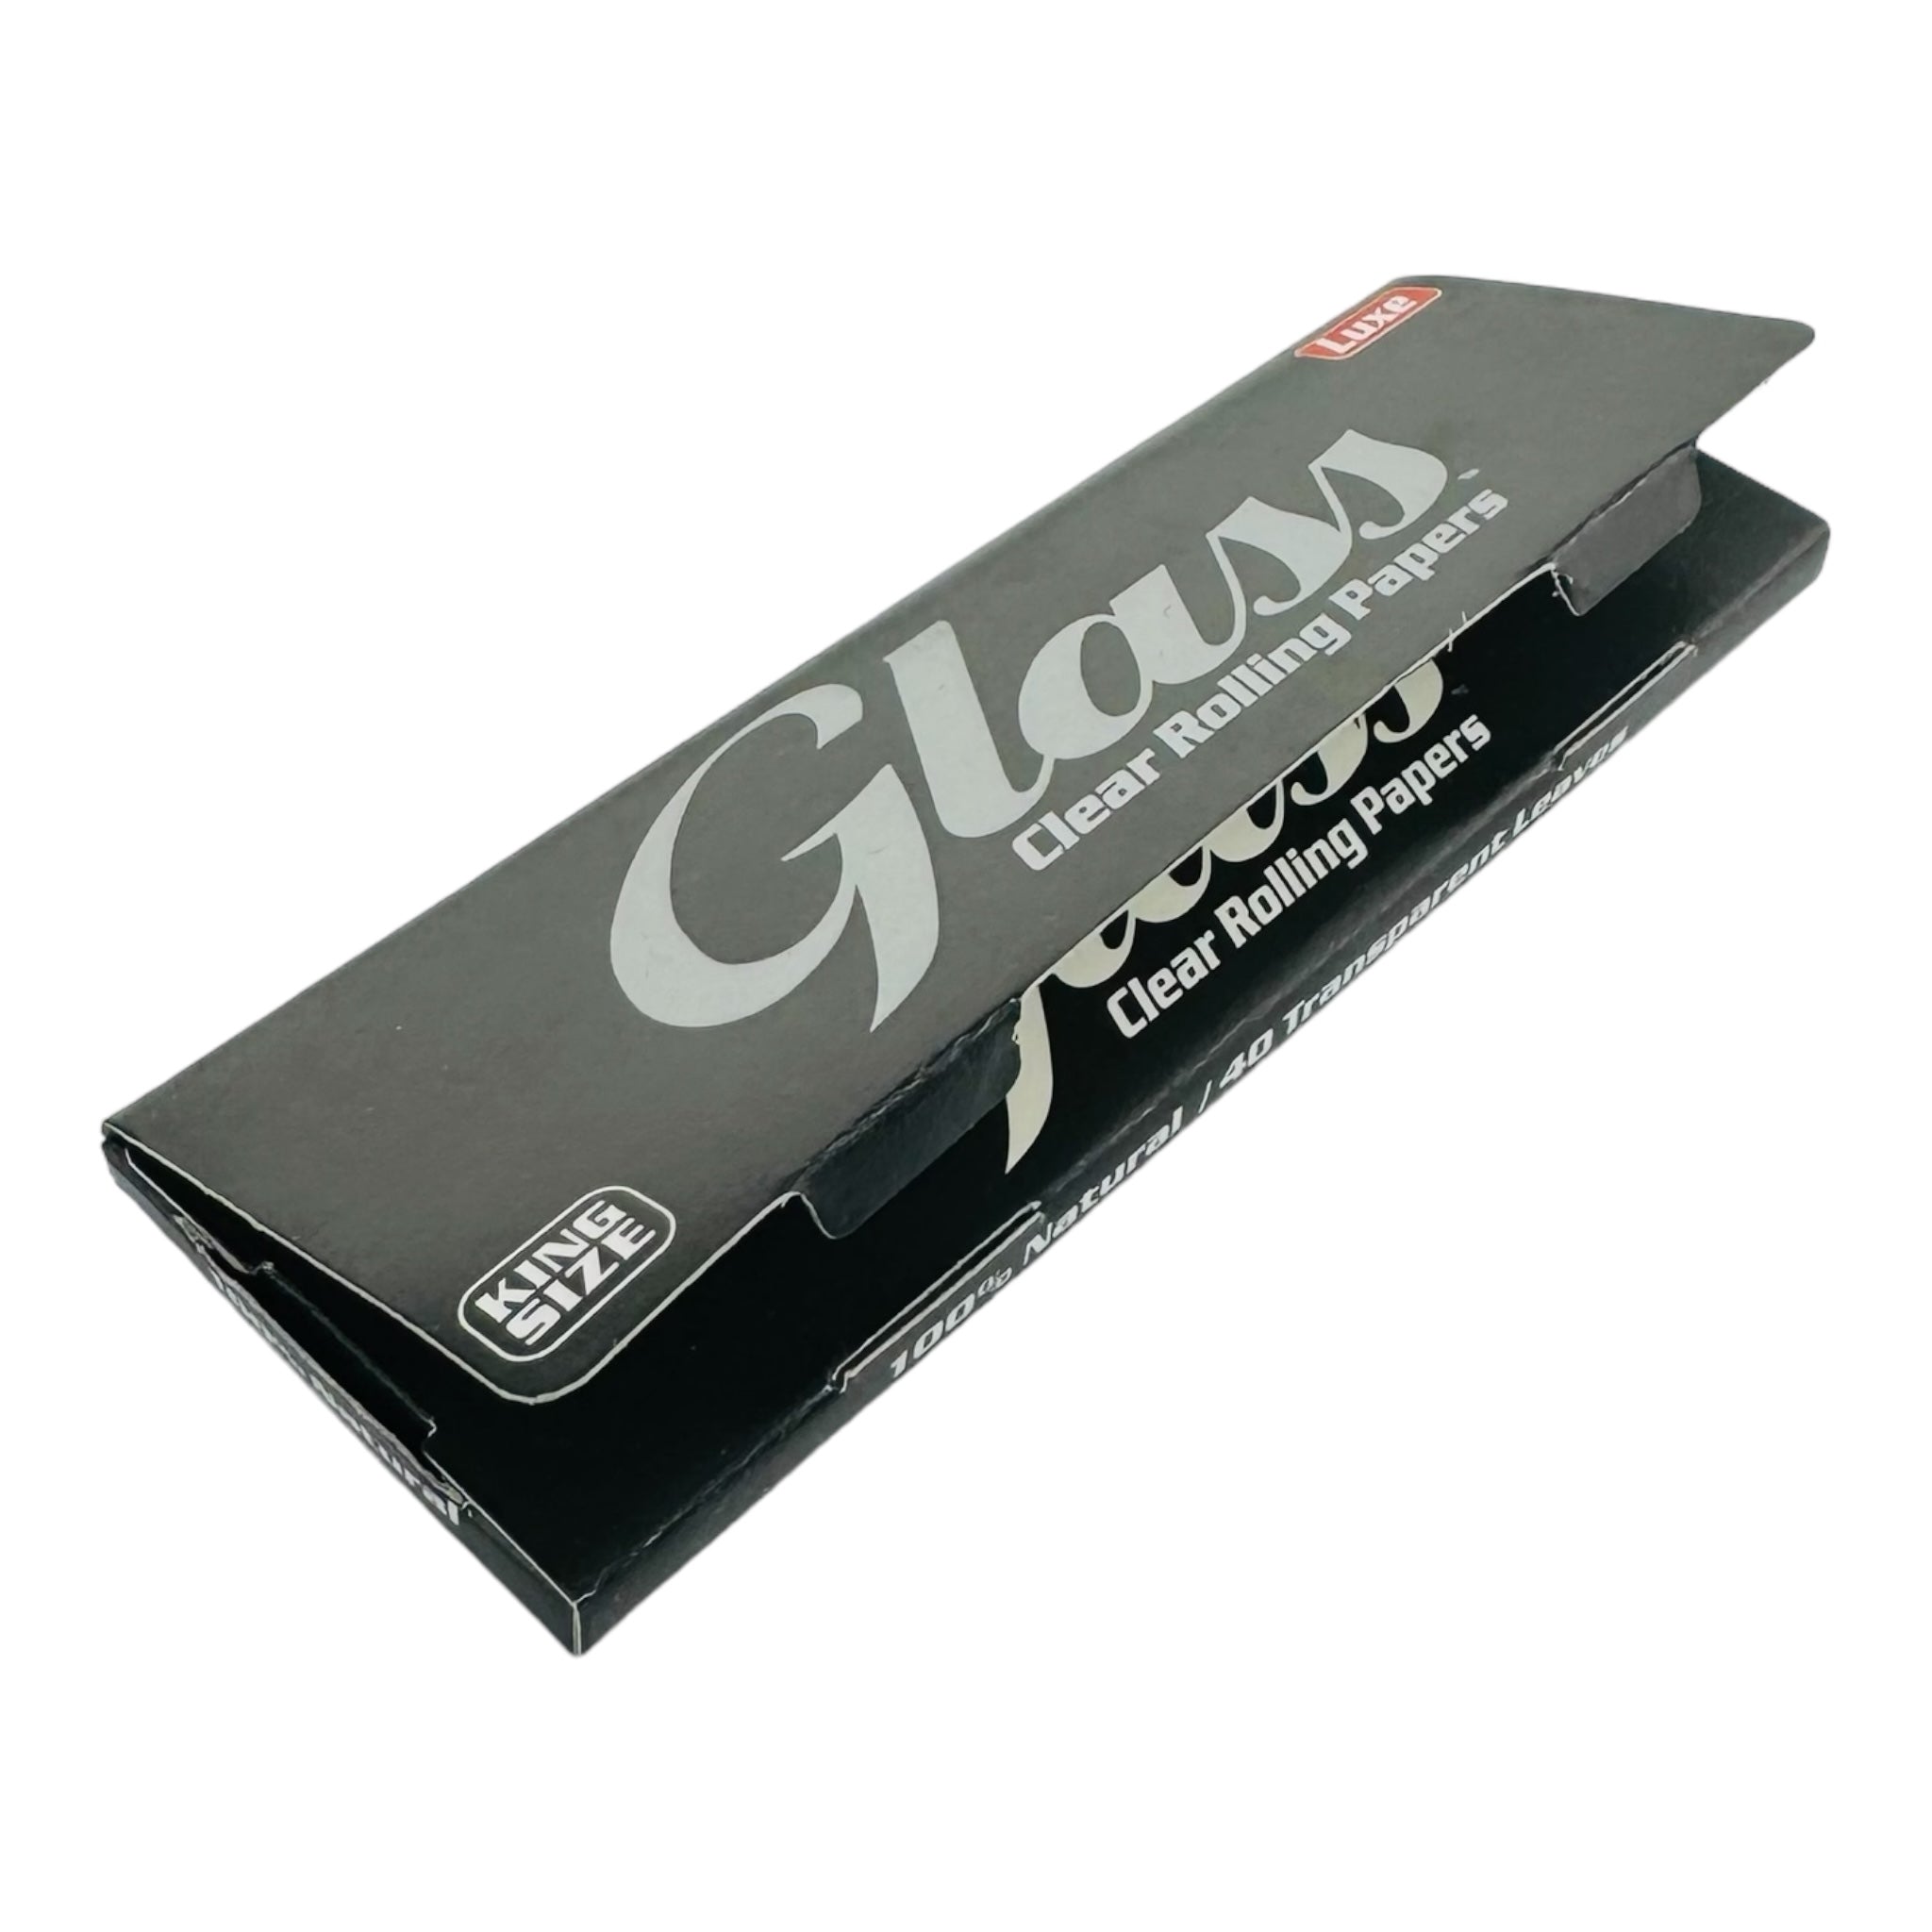 Glass Clear cellulose King Size Rolling Papers 4 Packs for sale